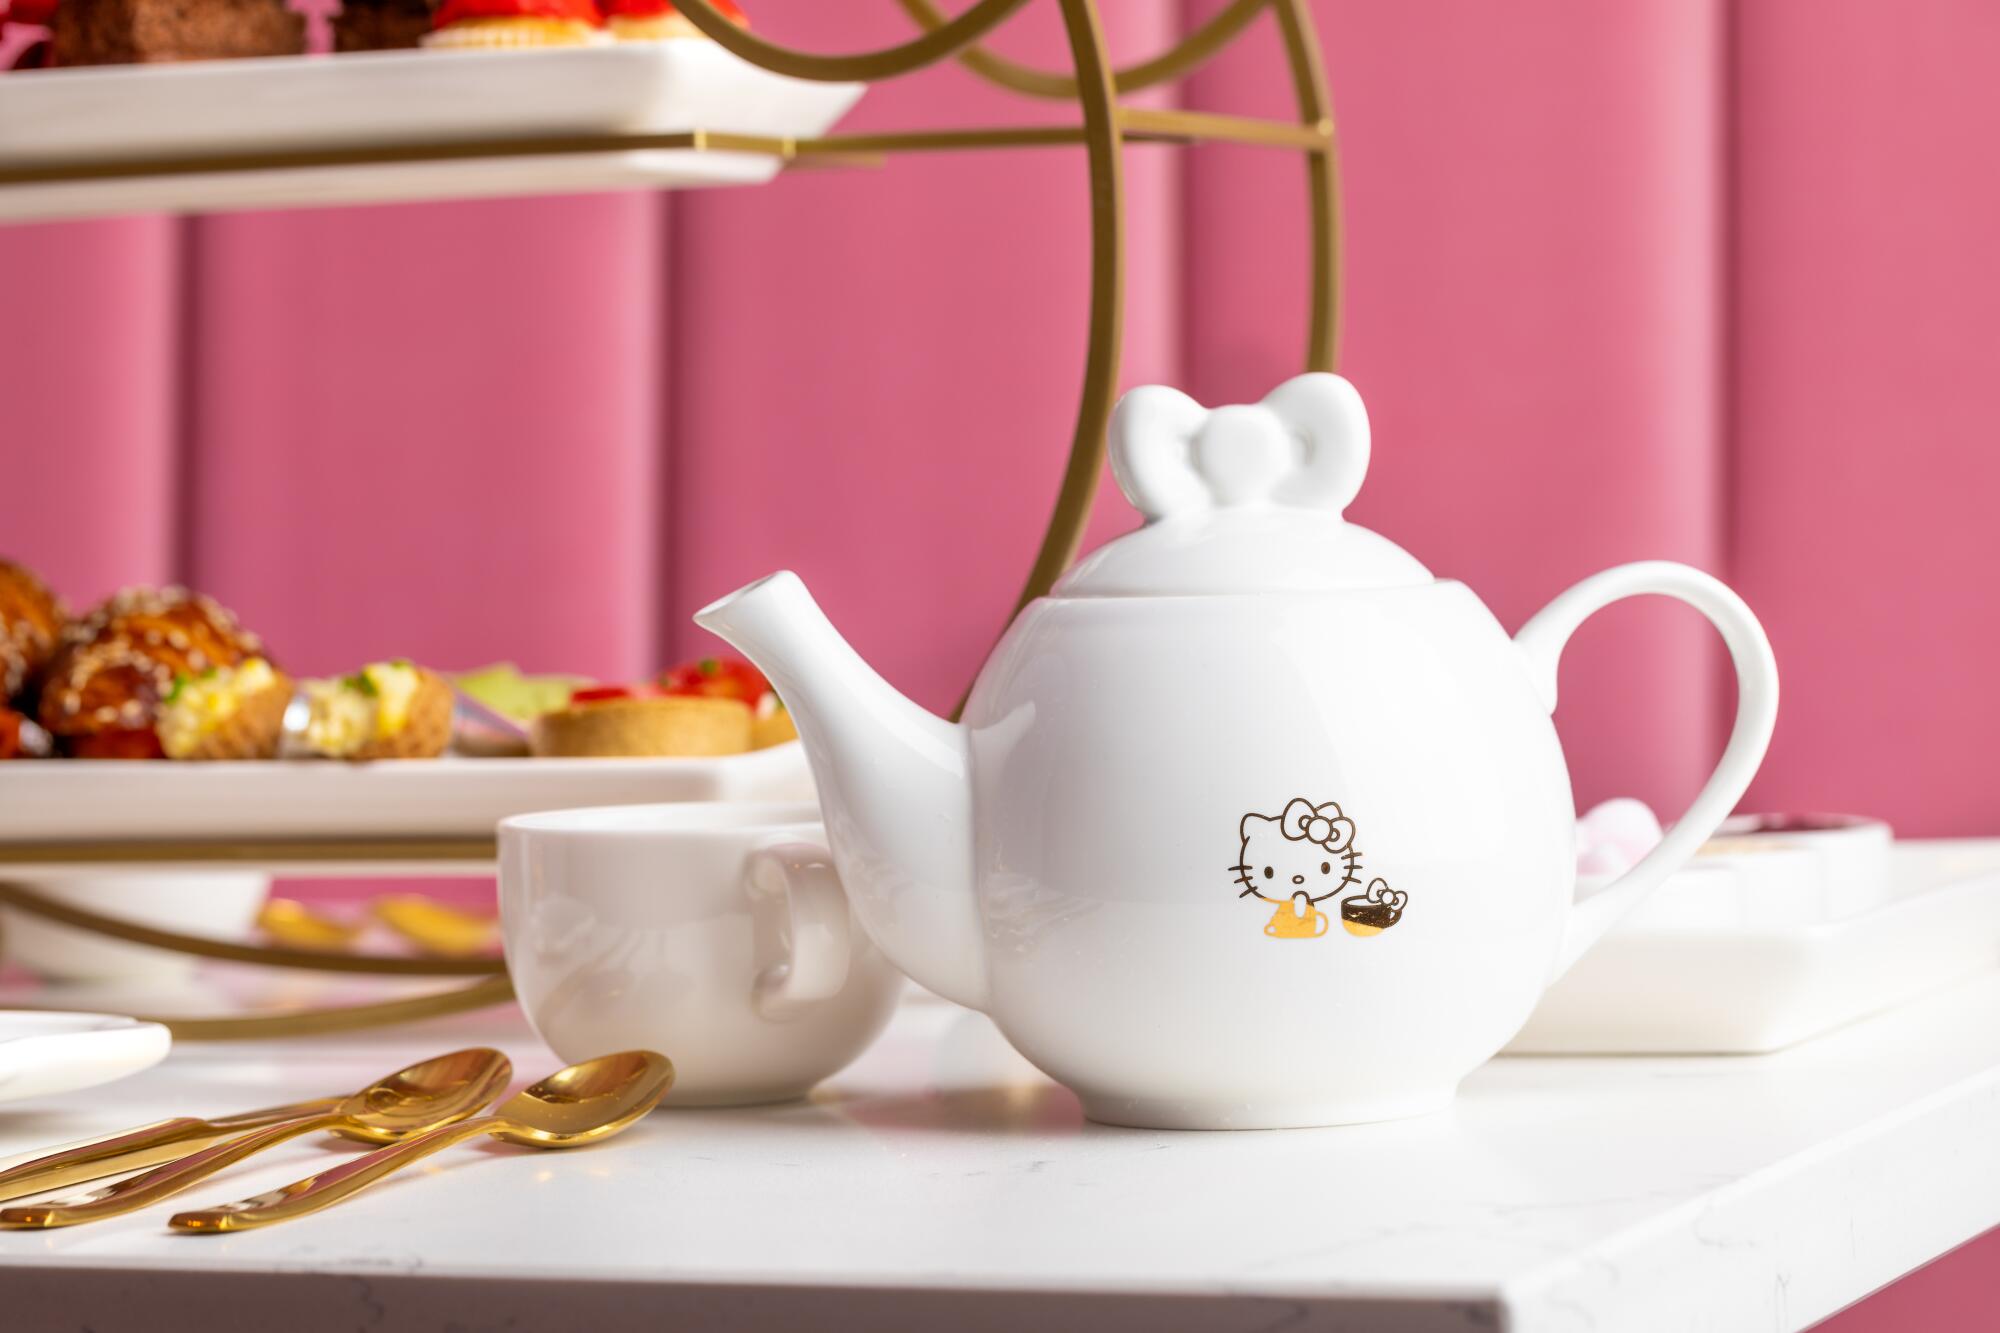 Afternoon Tea service at Hello Kitty Cafe in Irvine.